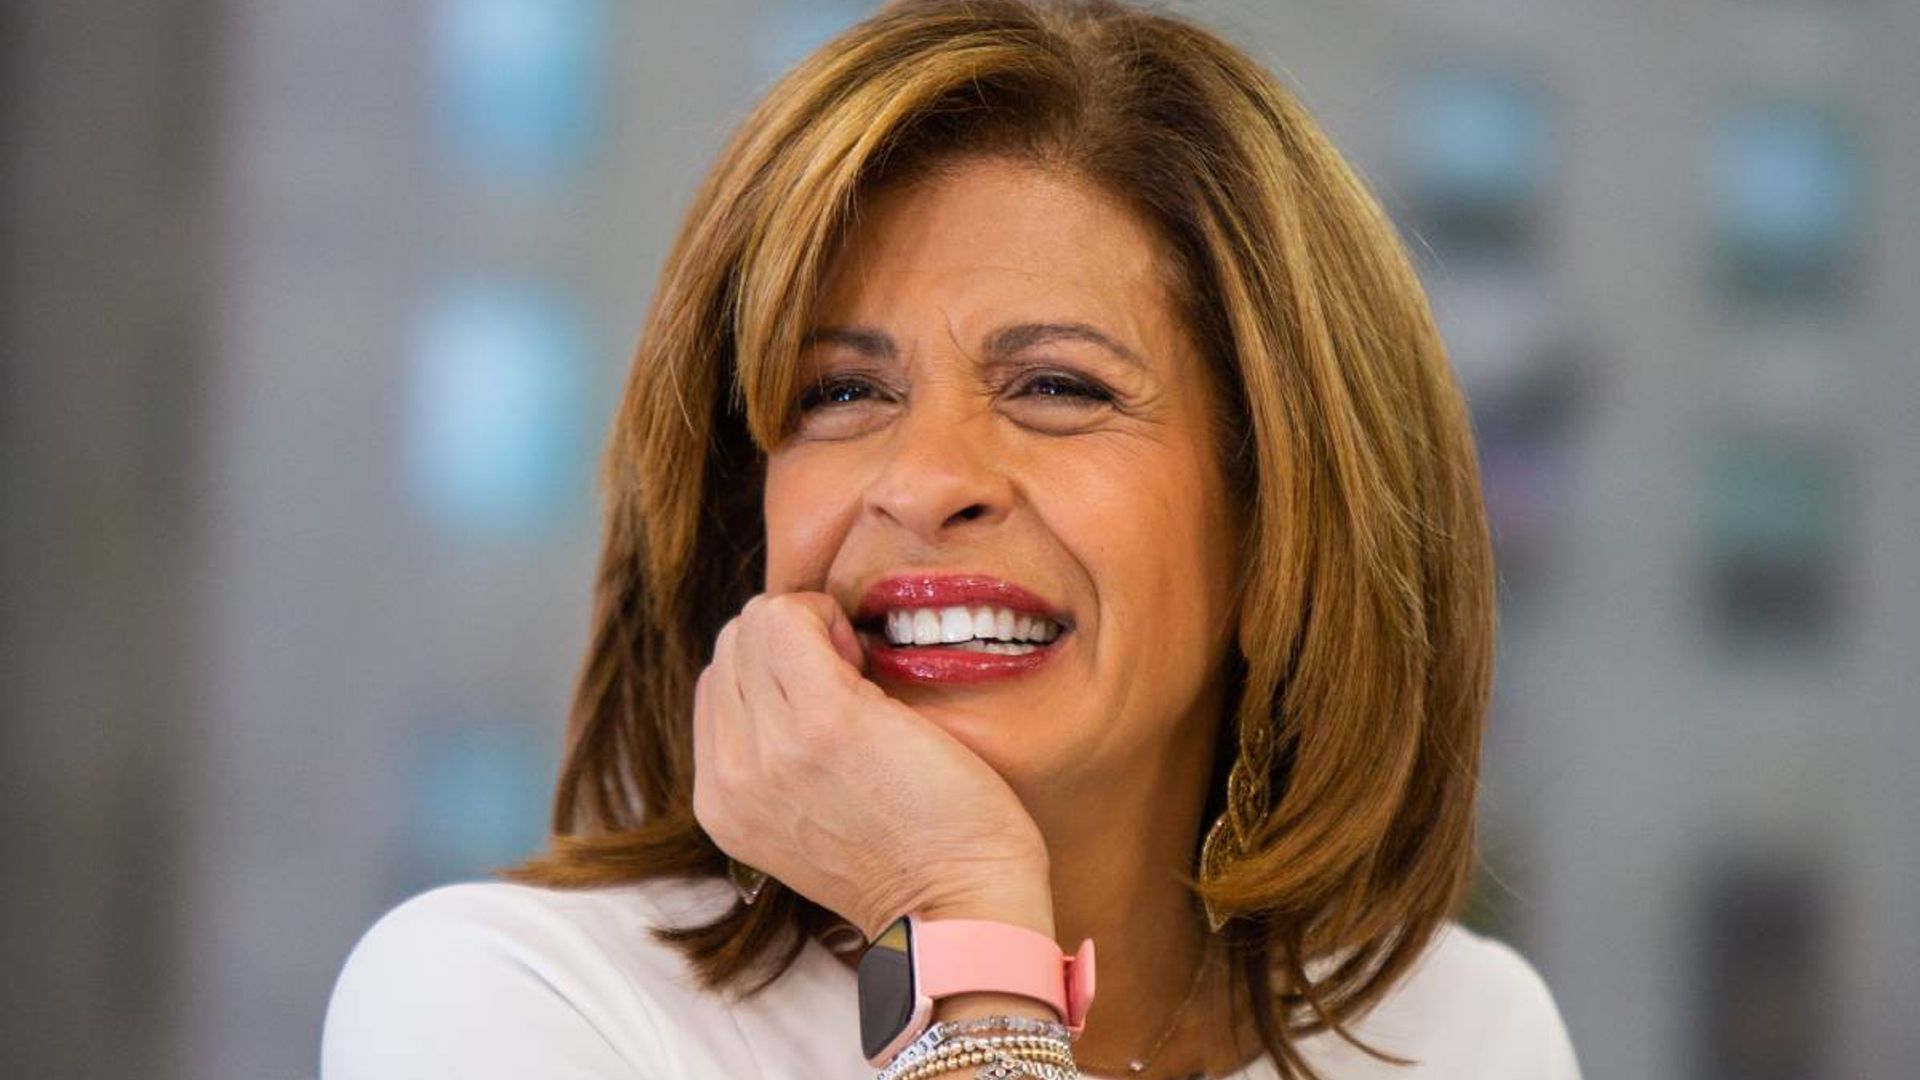 Hoda Kotb's new family photos with daughters leave fans doing a double-take